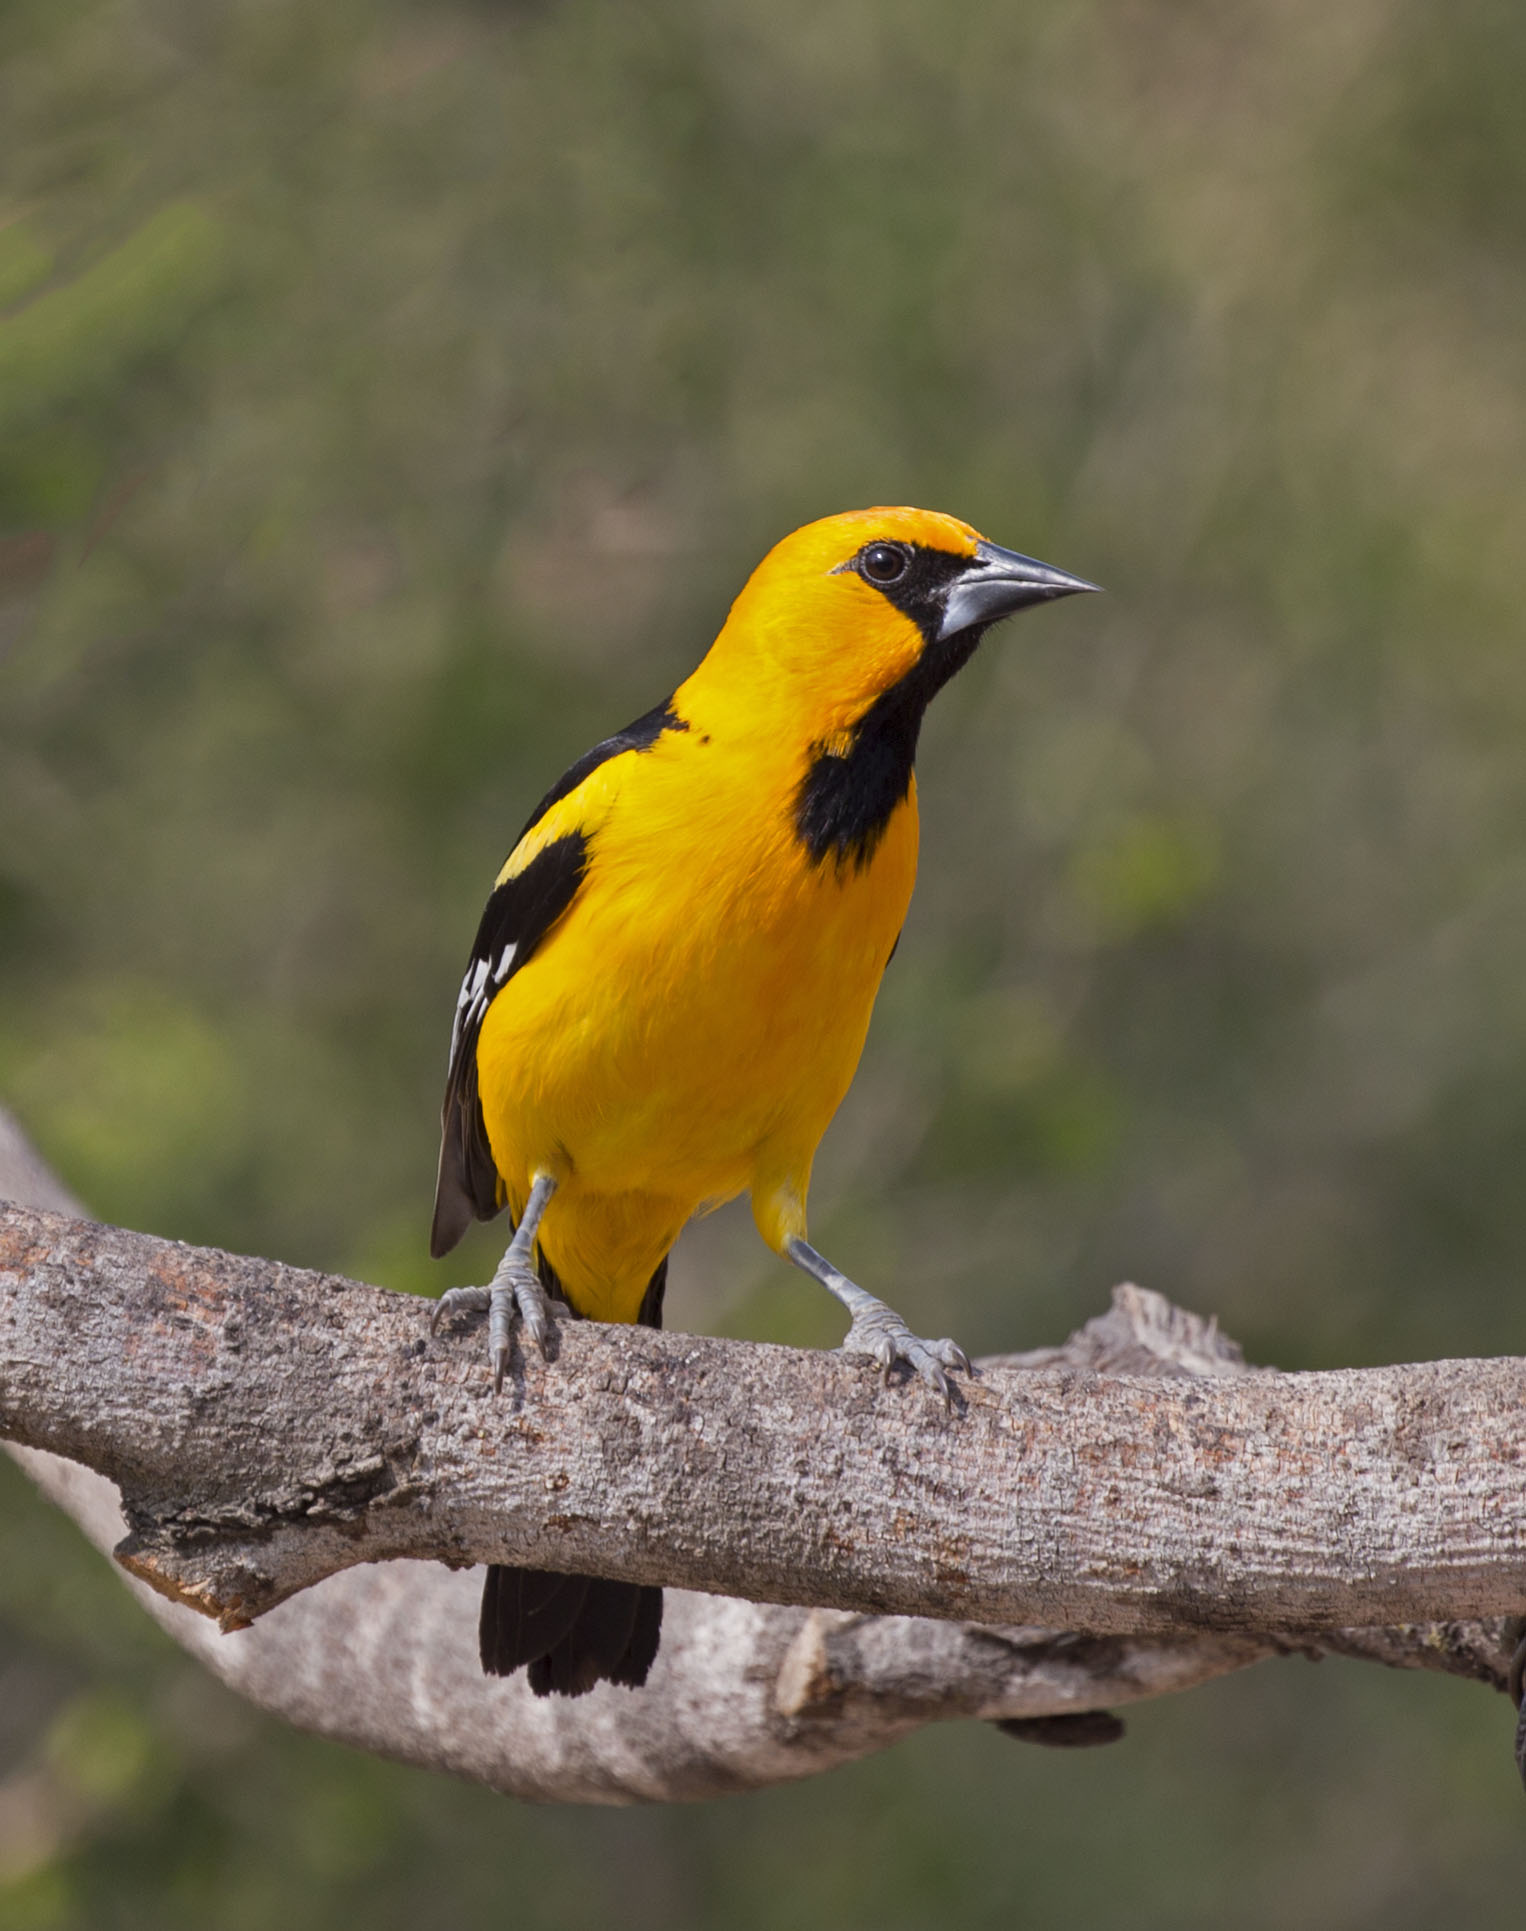 Pictures and information on Altamira Oriole